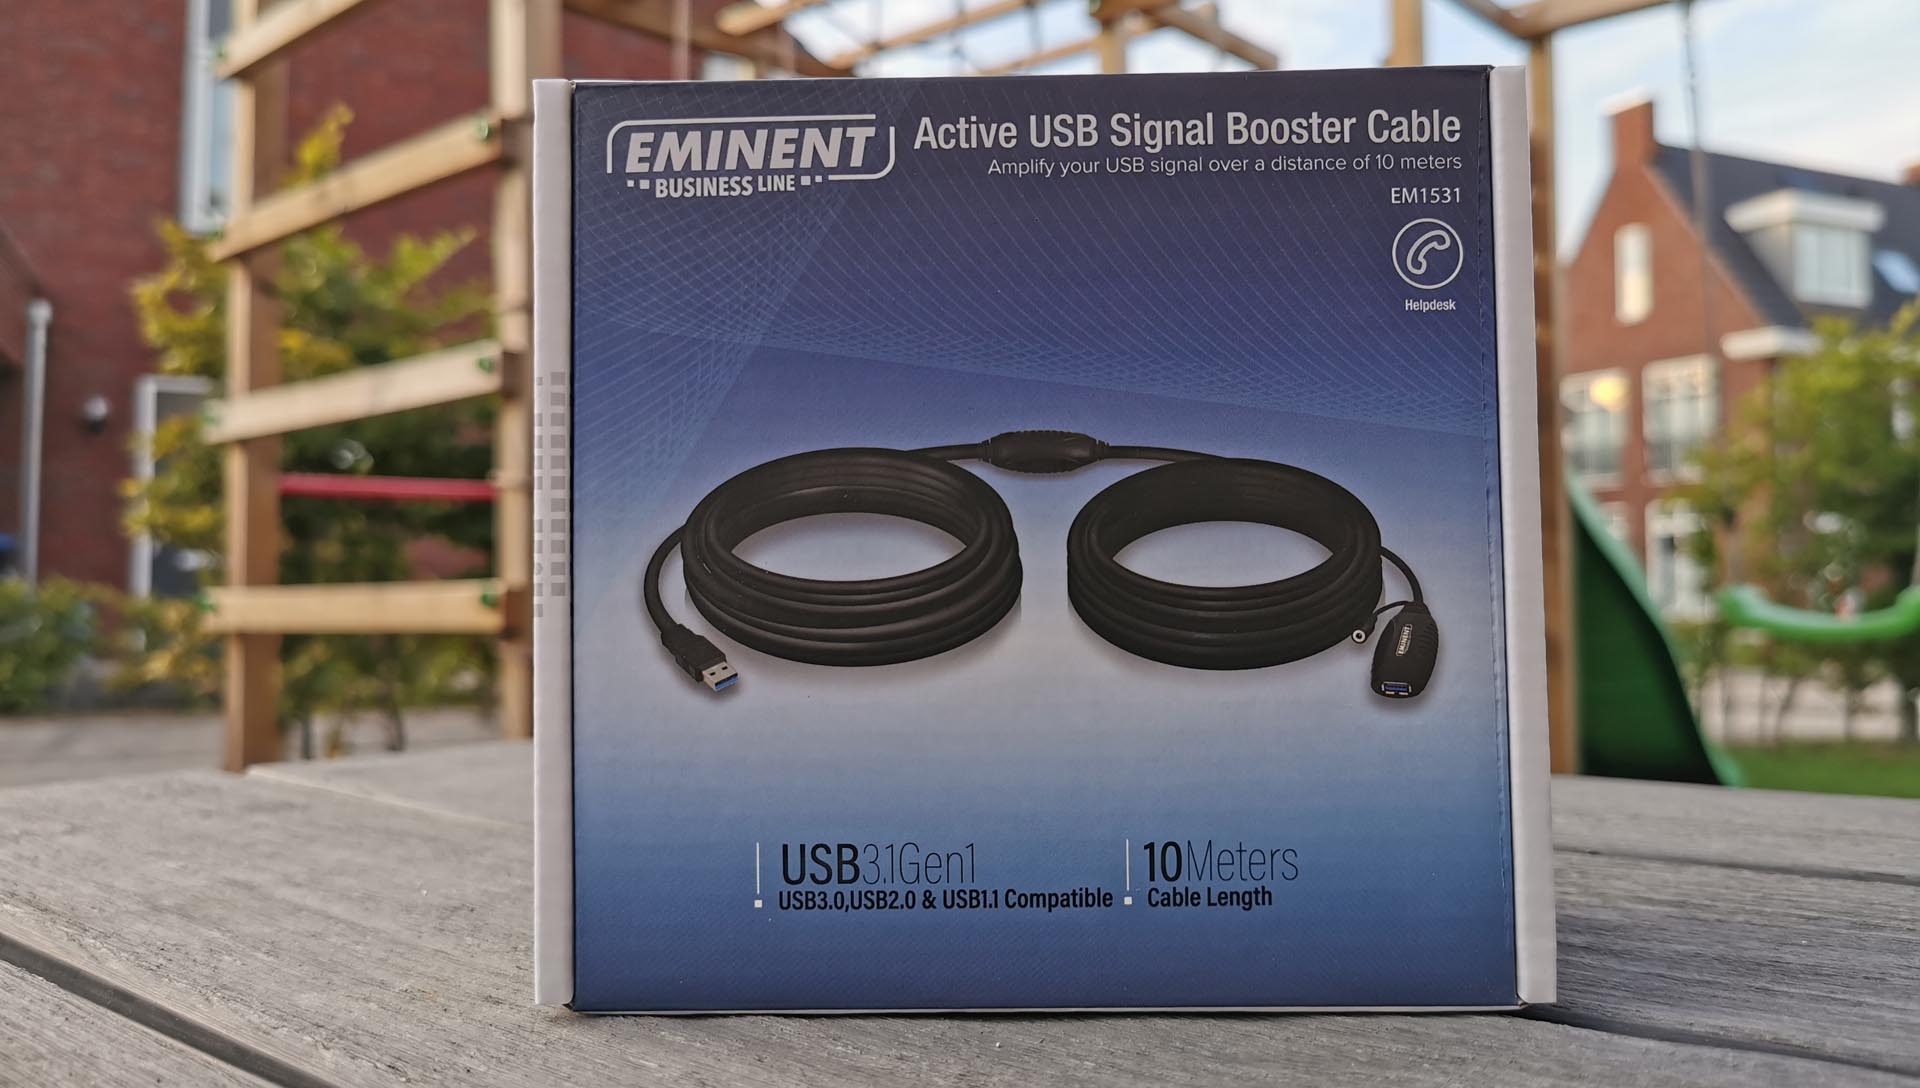 Eminent Active USB Signal Booster Cable Verpakking